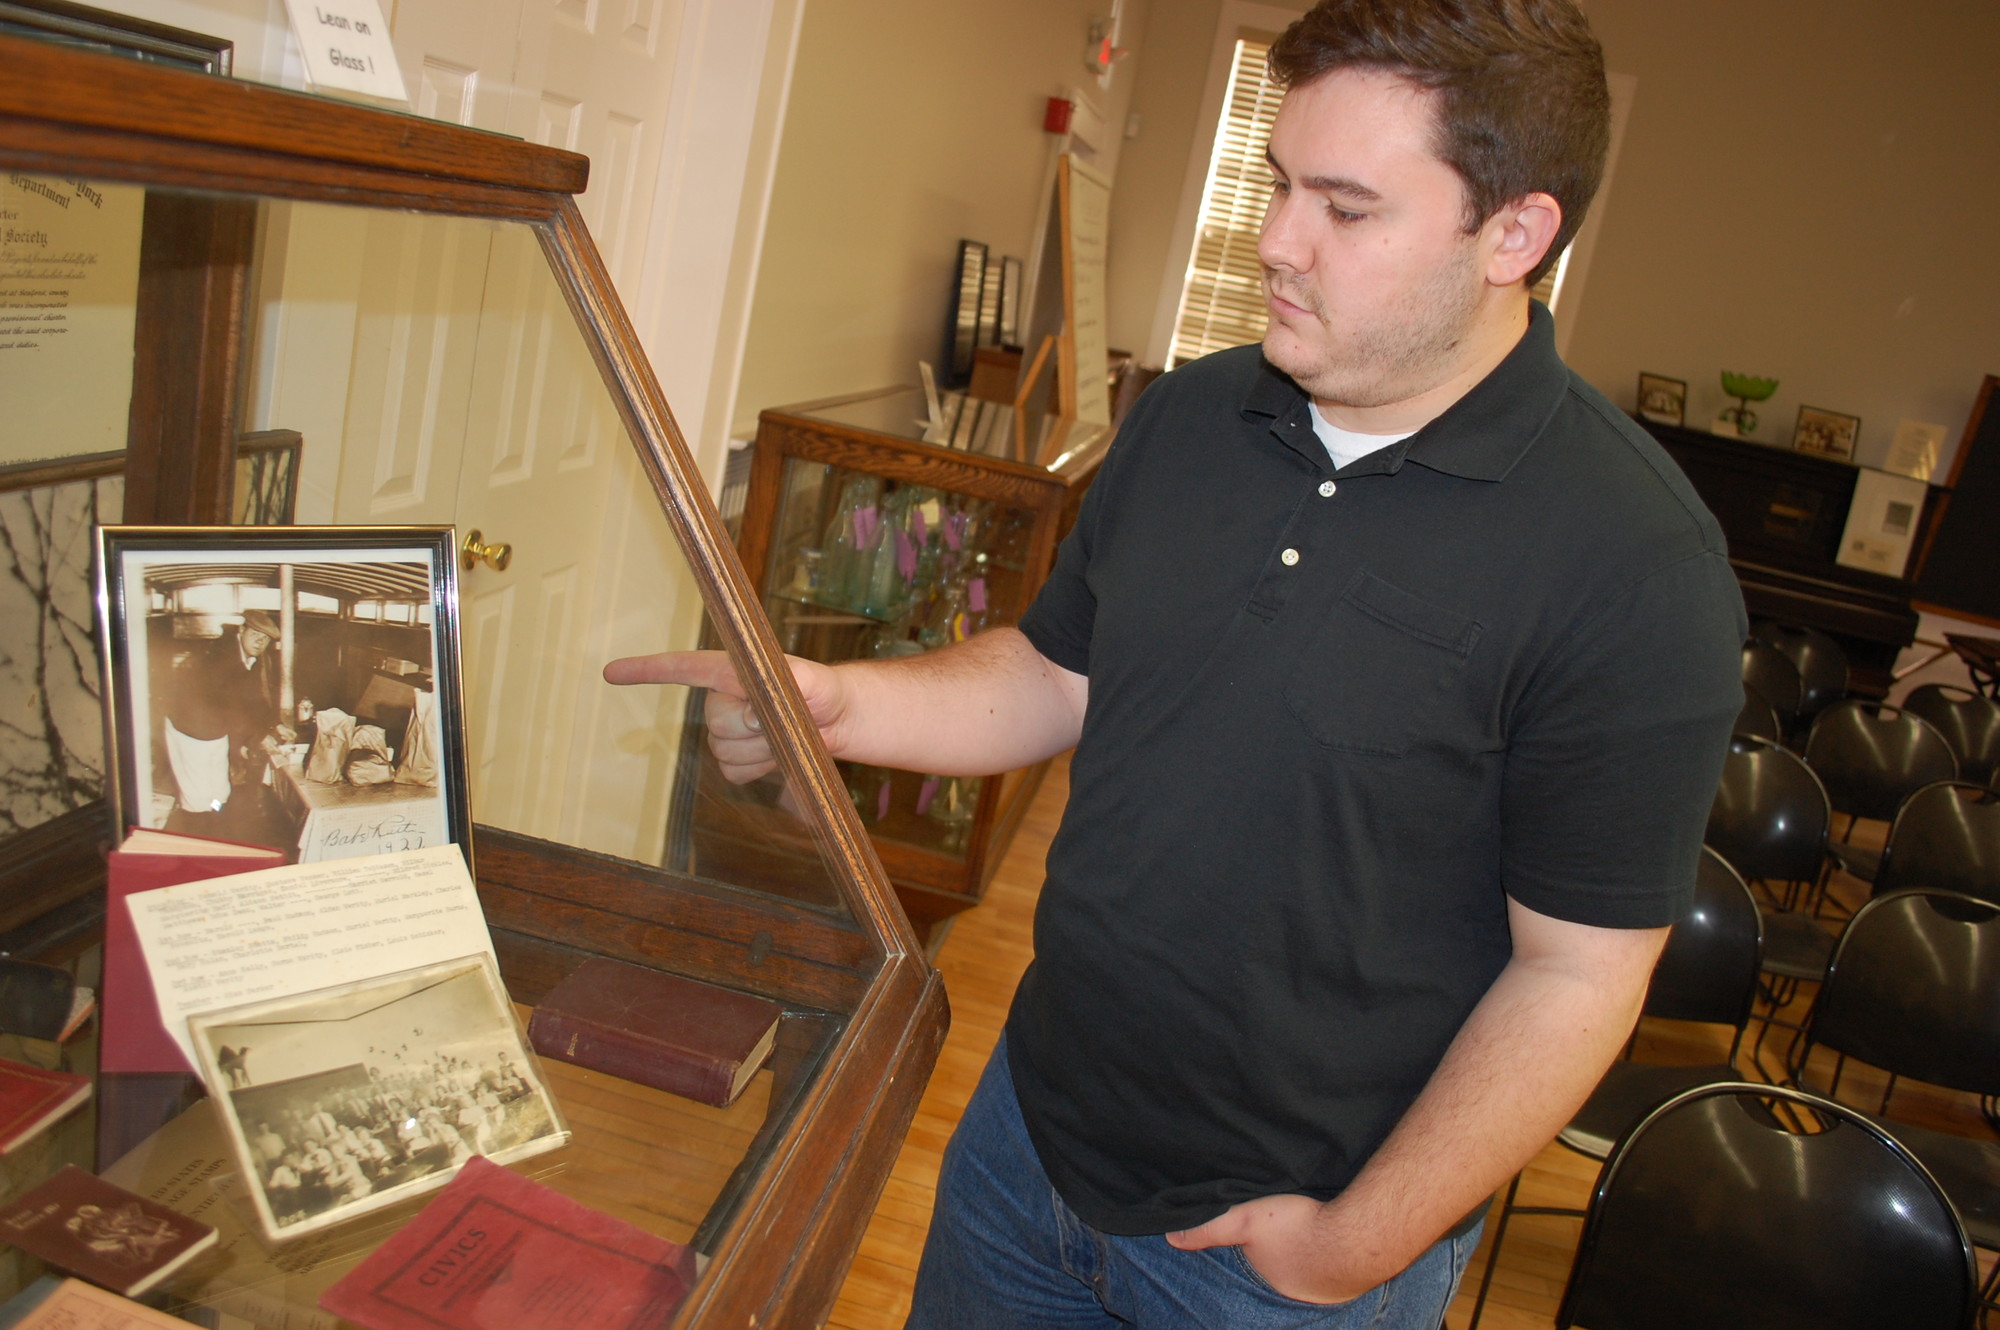 Seaford Historical Society member Patrick Martz showed a new addition to the collection — a photo of Babe Ruth, who regularly visited Seaford to go duck hunting.